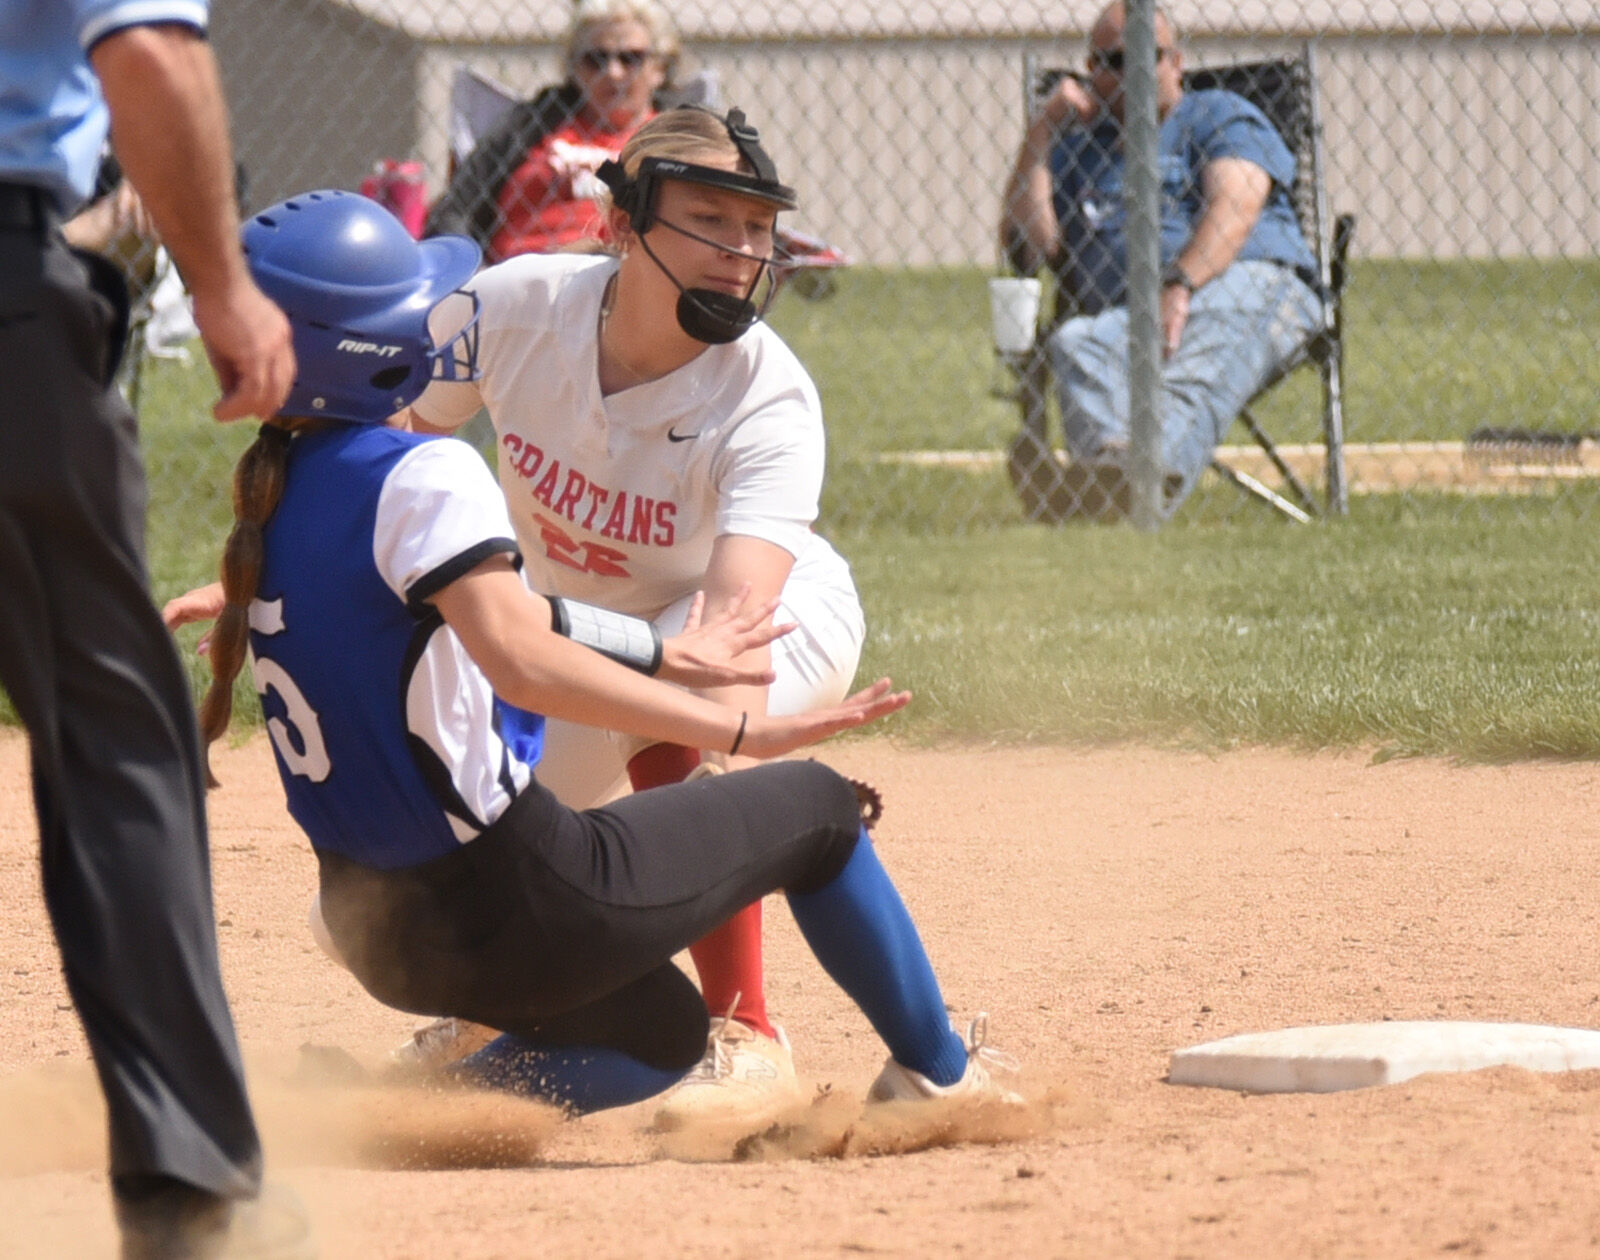 Connersville Sweeps Greensburg in Softball Doubleheader: Bresher Shines with Home Run Heroics